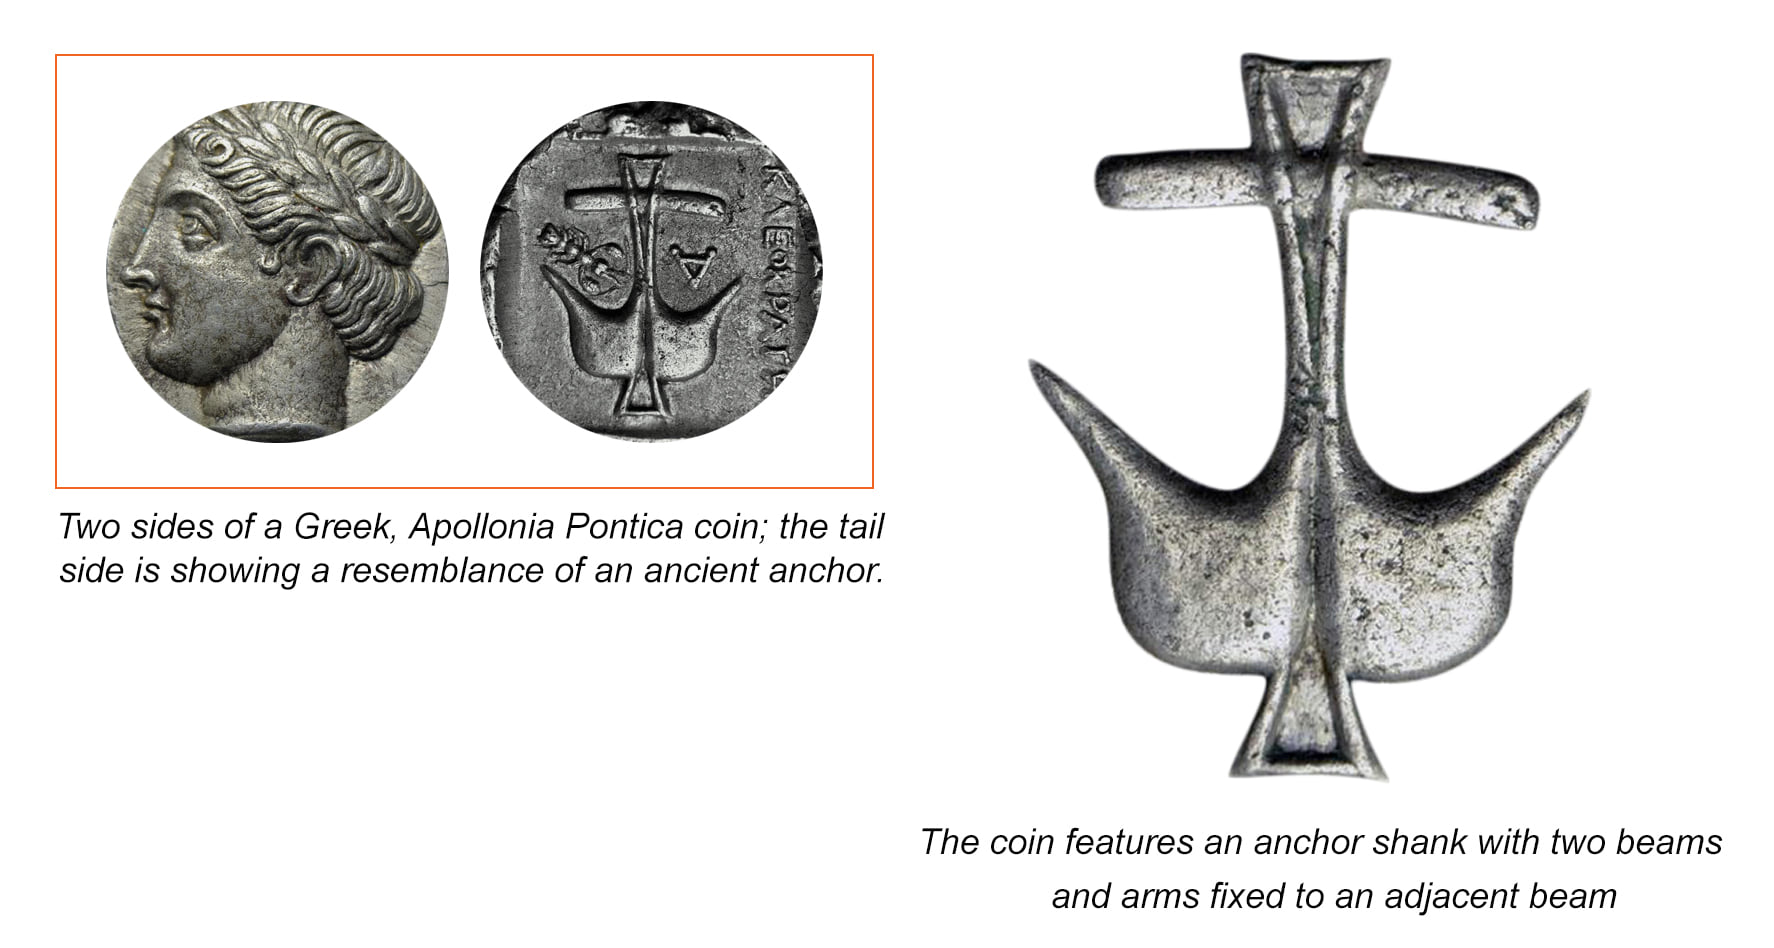 Features of an ancient anchor resemblance in Greek, Apollonia Pontica coin.